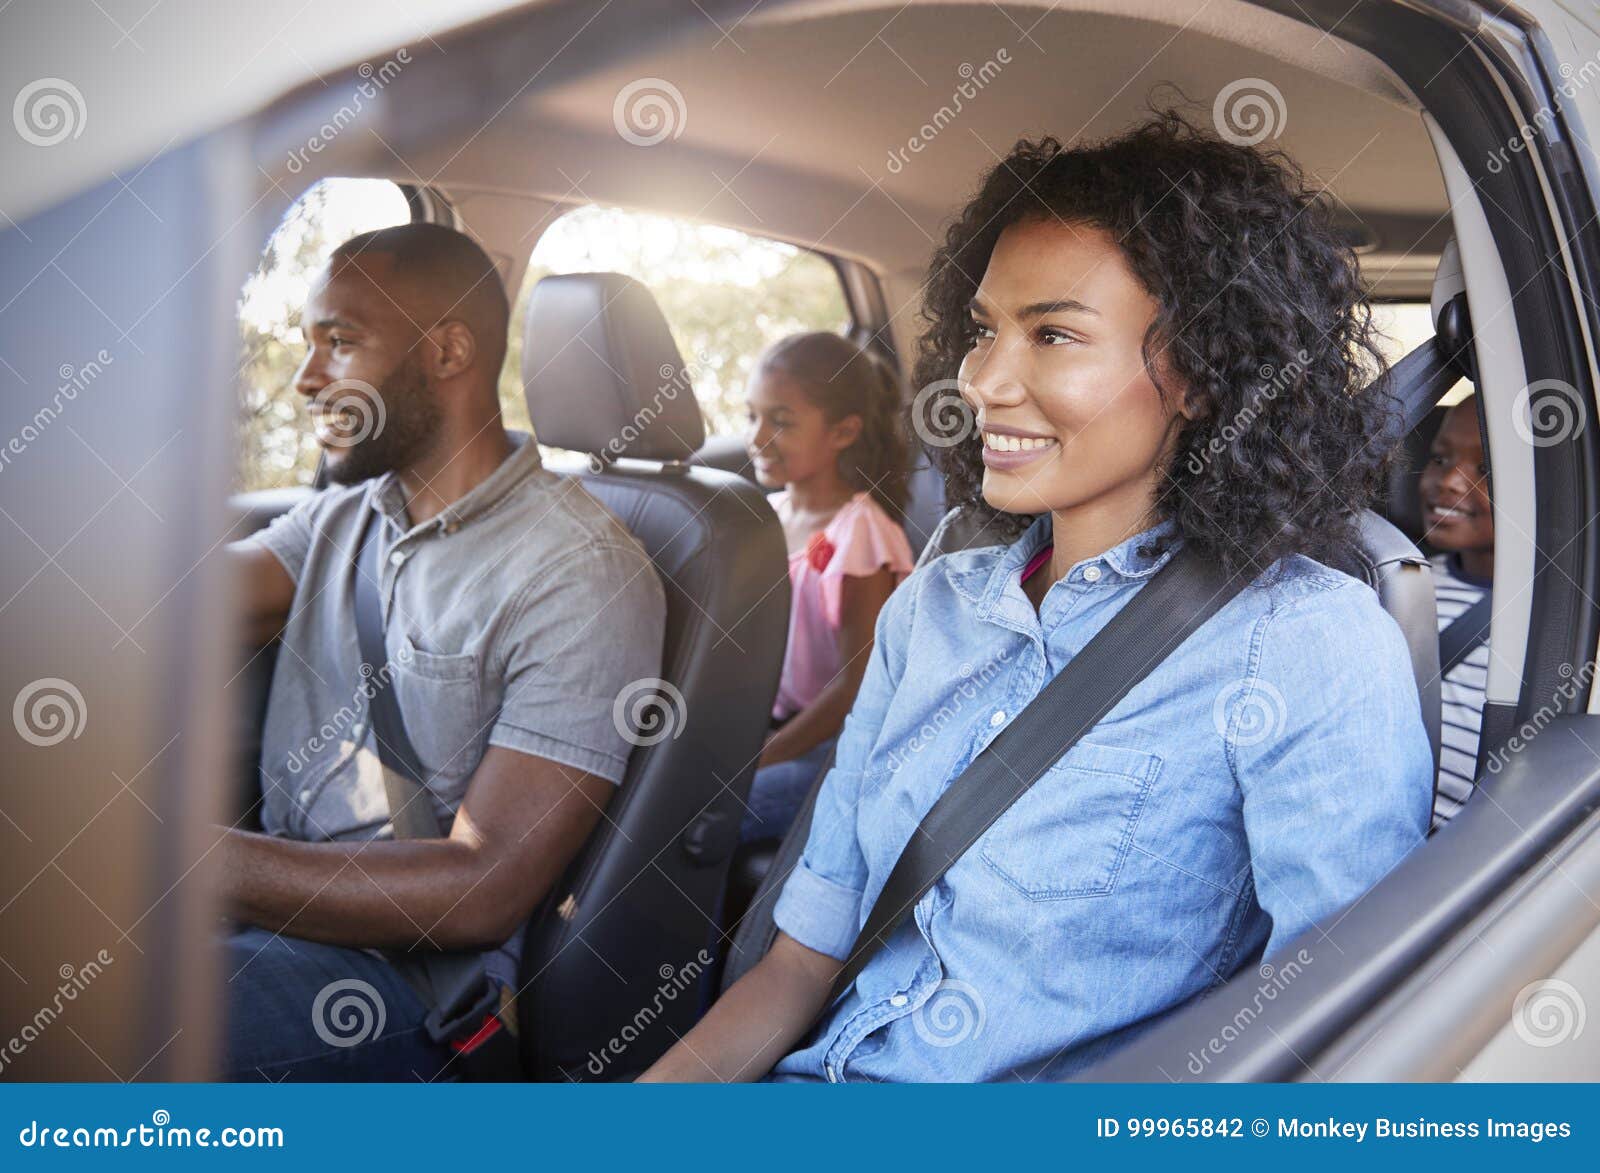 young black family with children in a car going on road trip